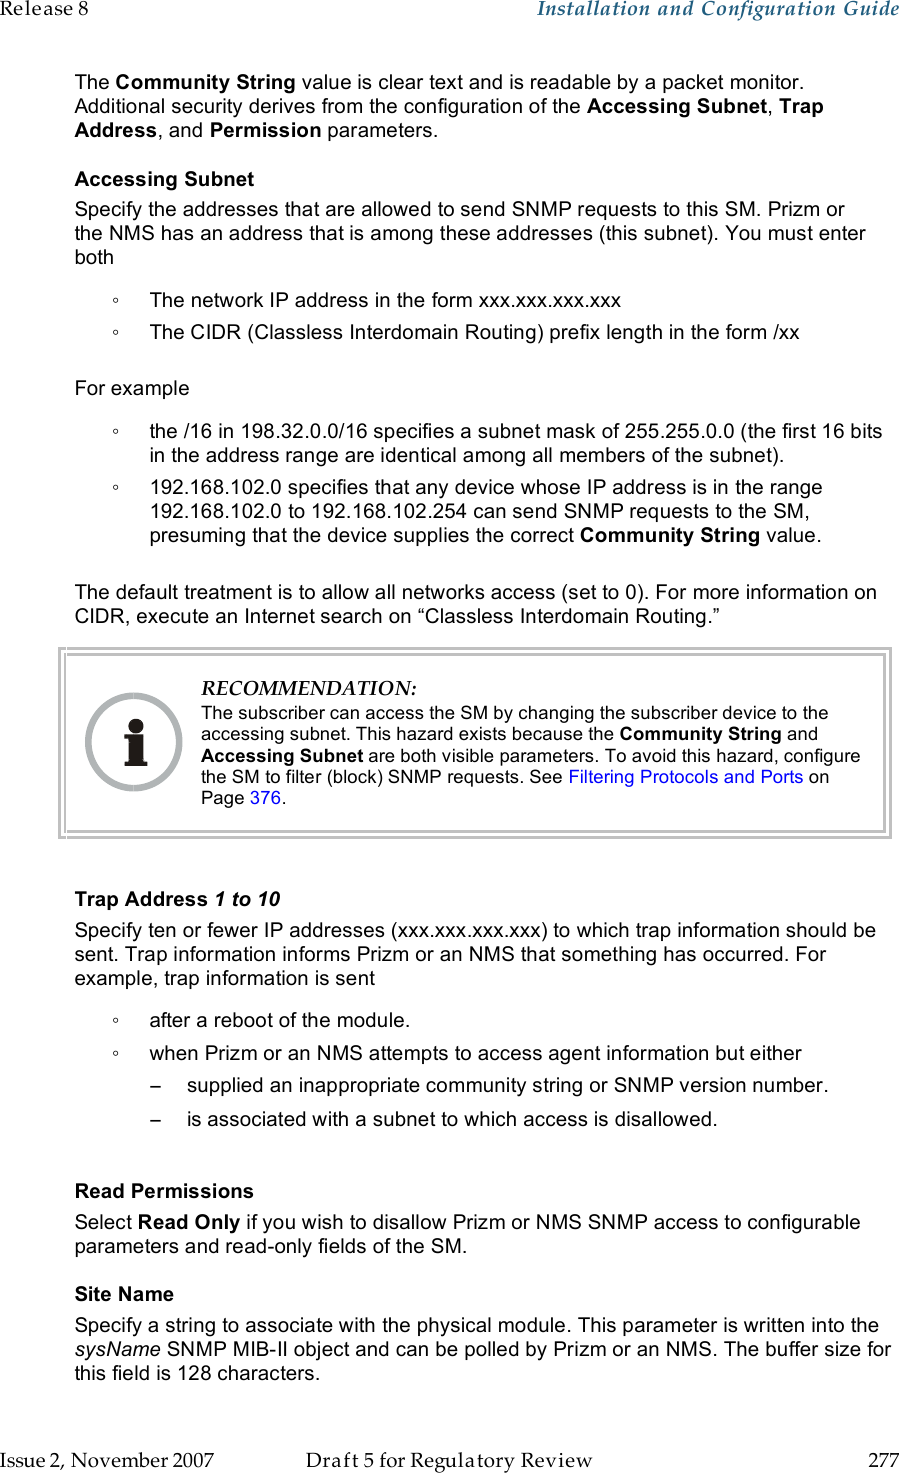 Release 8    Installation and Configuration Guide   Issue 2, November 2007  Draft 5 for Regulatory Review  277     The Community String value is clear text and is readable by a packet monitor. Additional security derives from the configuration of the Accessing Subnet, Trap Address, and Permission parameters. Accessing Subnet Specify the addresses that are allowed to send SNMP requests to this SM. Prizm or the NMS has an address that is among these addresses (this subnet). You must enter both ◦  The network IP address in the form xxx.xxx.xxx.xxx ◦  The CIDR (Classless Interdomain Routing) prefix length in the form /xx   For example ◦  the /16 in 198.32.0.0/16 specifies a subnet mask of 255.255.0.0 (the first 16 bits in the address range are identical among all members of the subnet).  ◦  192.168.102.0 specifies that any device whose IP address is in the range 192.168.102.0 to 192.168.102.254 can send SNMP requests to the SM, presuming that the device supplies the correct Community String value.   The default treatment is to allow all networks access (set to 0). For more information on CIDR, execute an Internet search on “Classless Interdomain Routing.”  RECOMMENDATION: The subscriber can access the SM by changing the subscriber device to the accessing subnet. This hazard exists because the Community String and Accessing Subnet are both visible parameters. To avoid this hazard, configure the SM to filter (block) SNMP requests. See Filtering Protocols and Ports on Page 376.  Trap Address 1 to 10 Specify ten or fewer IP addresses (xxx.xxx.xxx.xxx) to which trap information should be sent. Trap information informs Prizm or an NMS that something has occurred. For example, trap information is sent ◦  after a reboot of the module. ◦  when Prizm or an NMS attempts to access agent information but either −  supplied an inappropriate community string or SNMP version number. −  is associated with a subnet to which access is disallowed.  Read Permissions Select Read Only if you wish to disallow Prizm or NMS SNMP access to configurable parameters and read-only fields of the SM.  Site Name Specify a string to associate with the physical module. This parameter is written into the sysName SNMP MIB-II object and can be polled by Prizm or an NMS. The buffer size for this field is 128 characters.  